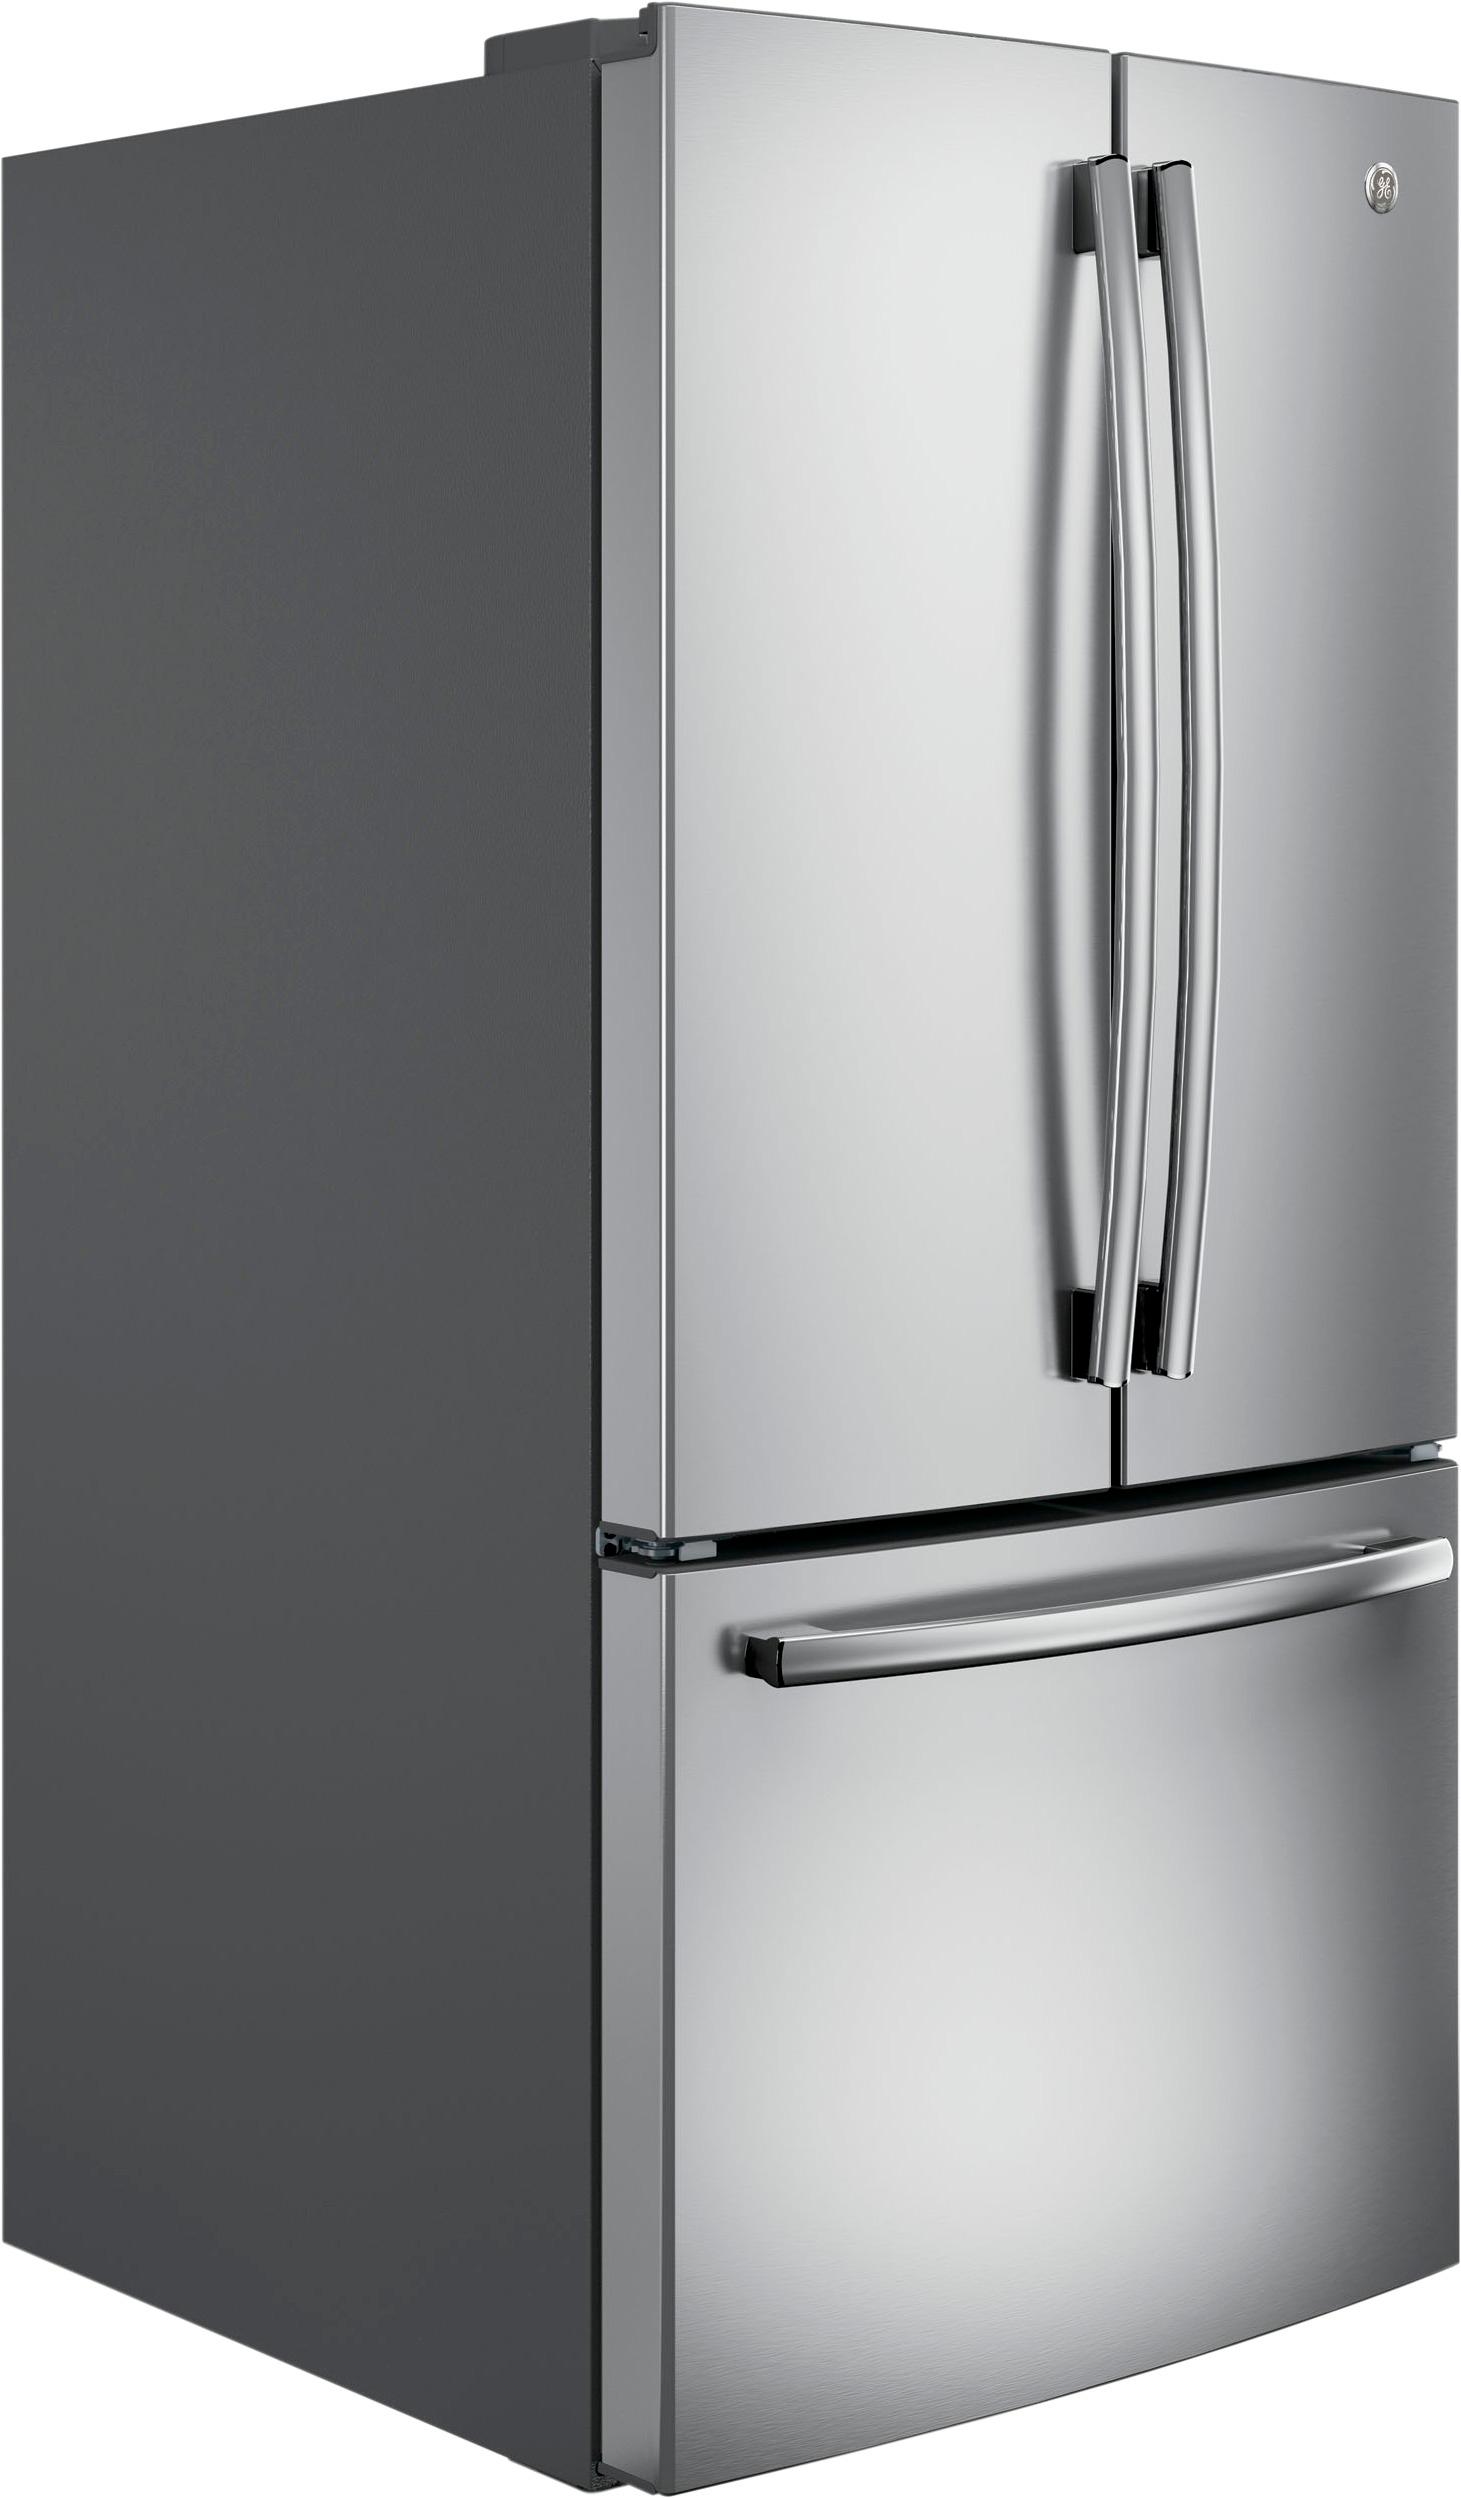 Angle View: GE - 24.8 Cu. Ft. French Door Refrigerator - Stainless steel